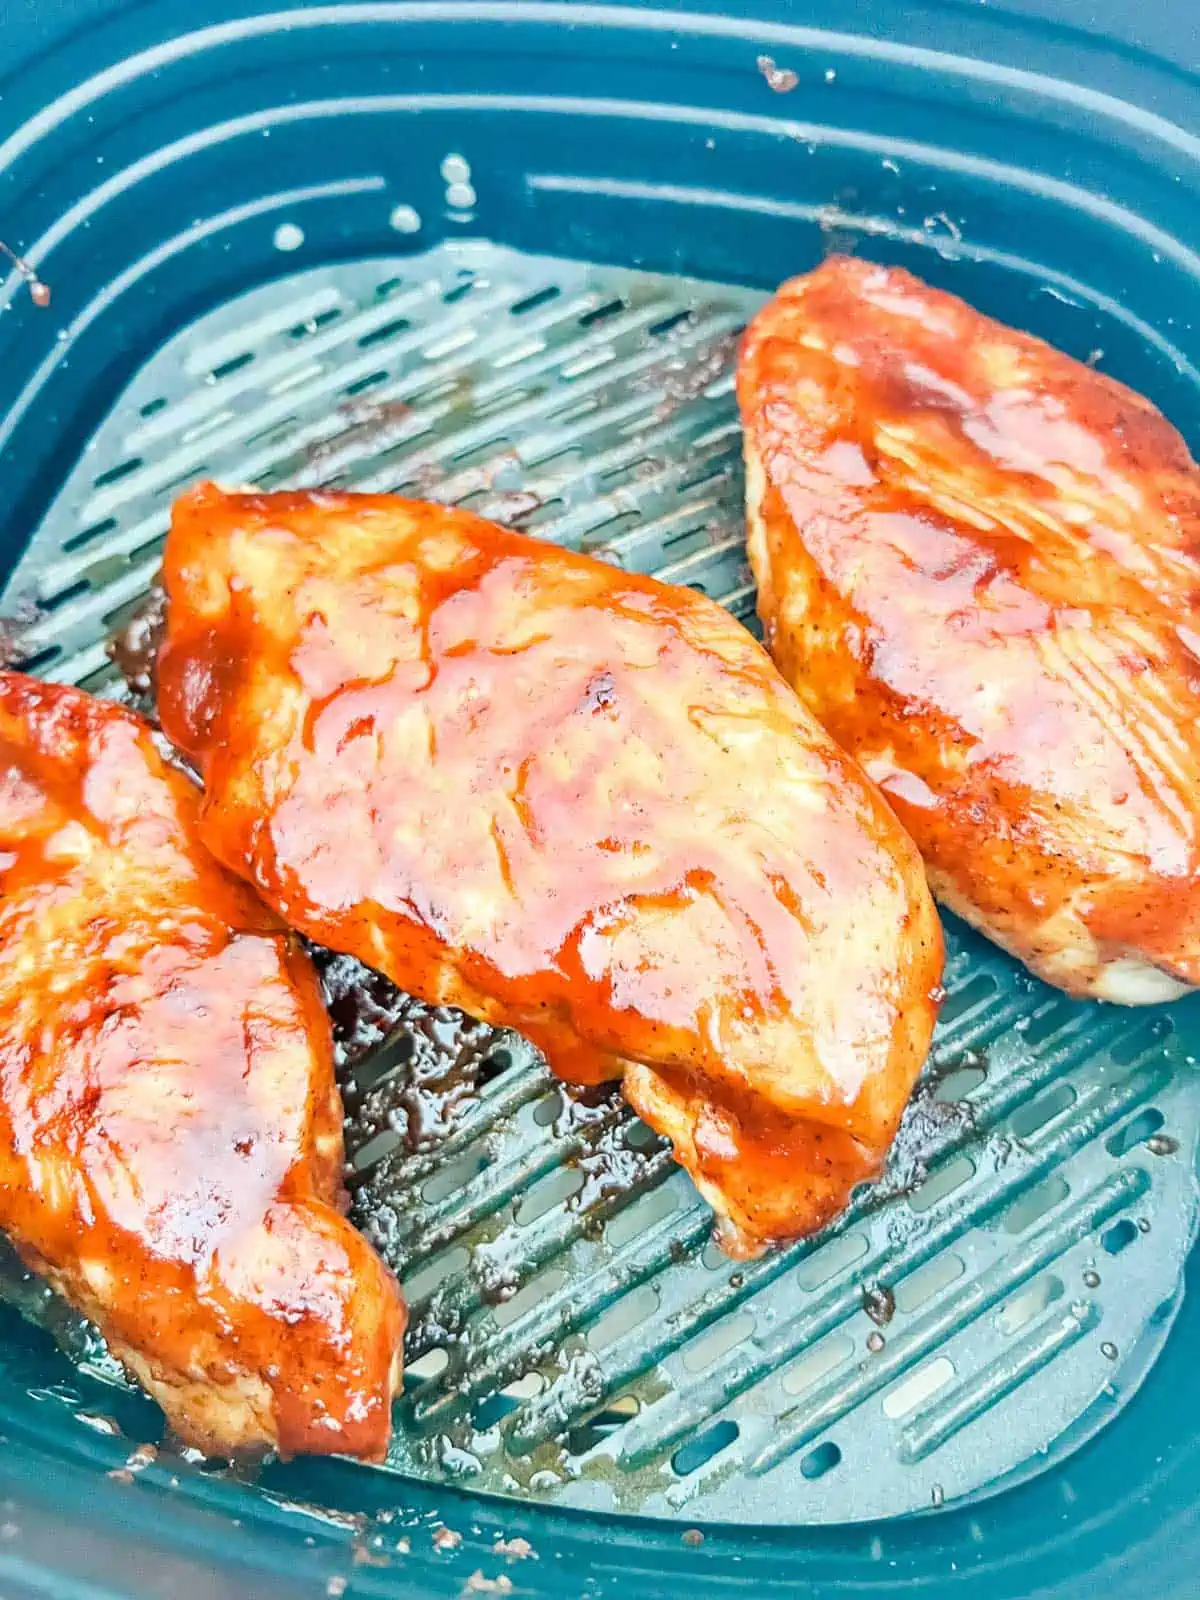 BBQ sauce coated chicken breast in an air fryer.